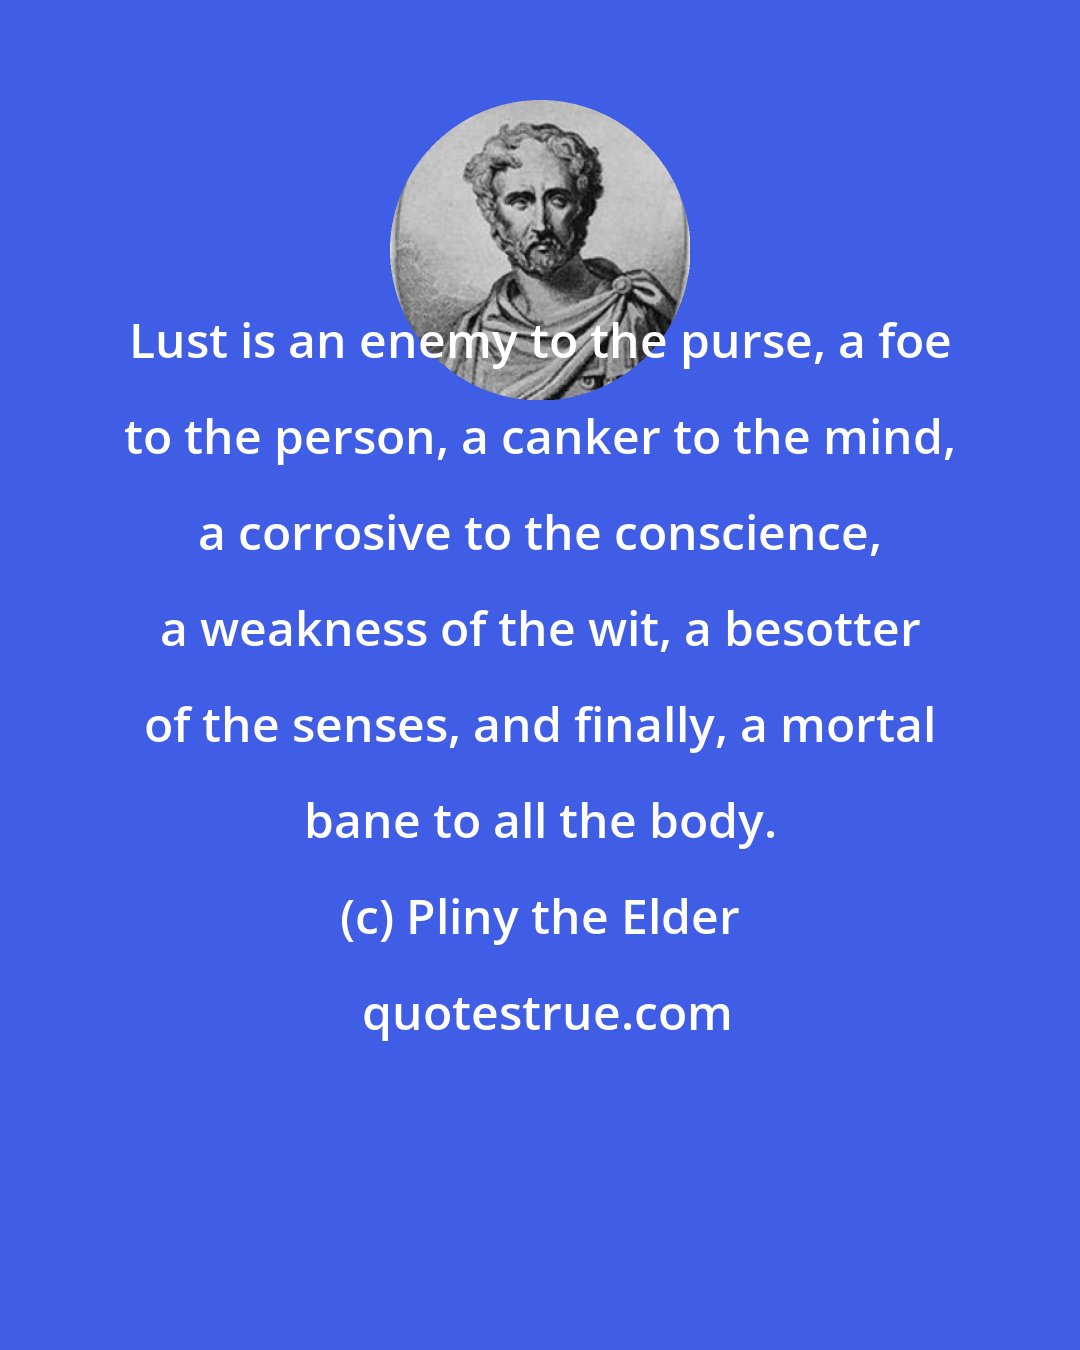 Pliny the Elder: Lust is an enemy to the purse, a foe to the person, a canker to the mind, a corrosive to the conscience, a weakness of the wit, a besotter of the senses, and finally, a mortal bane to all the body.